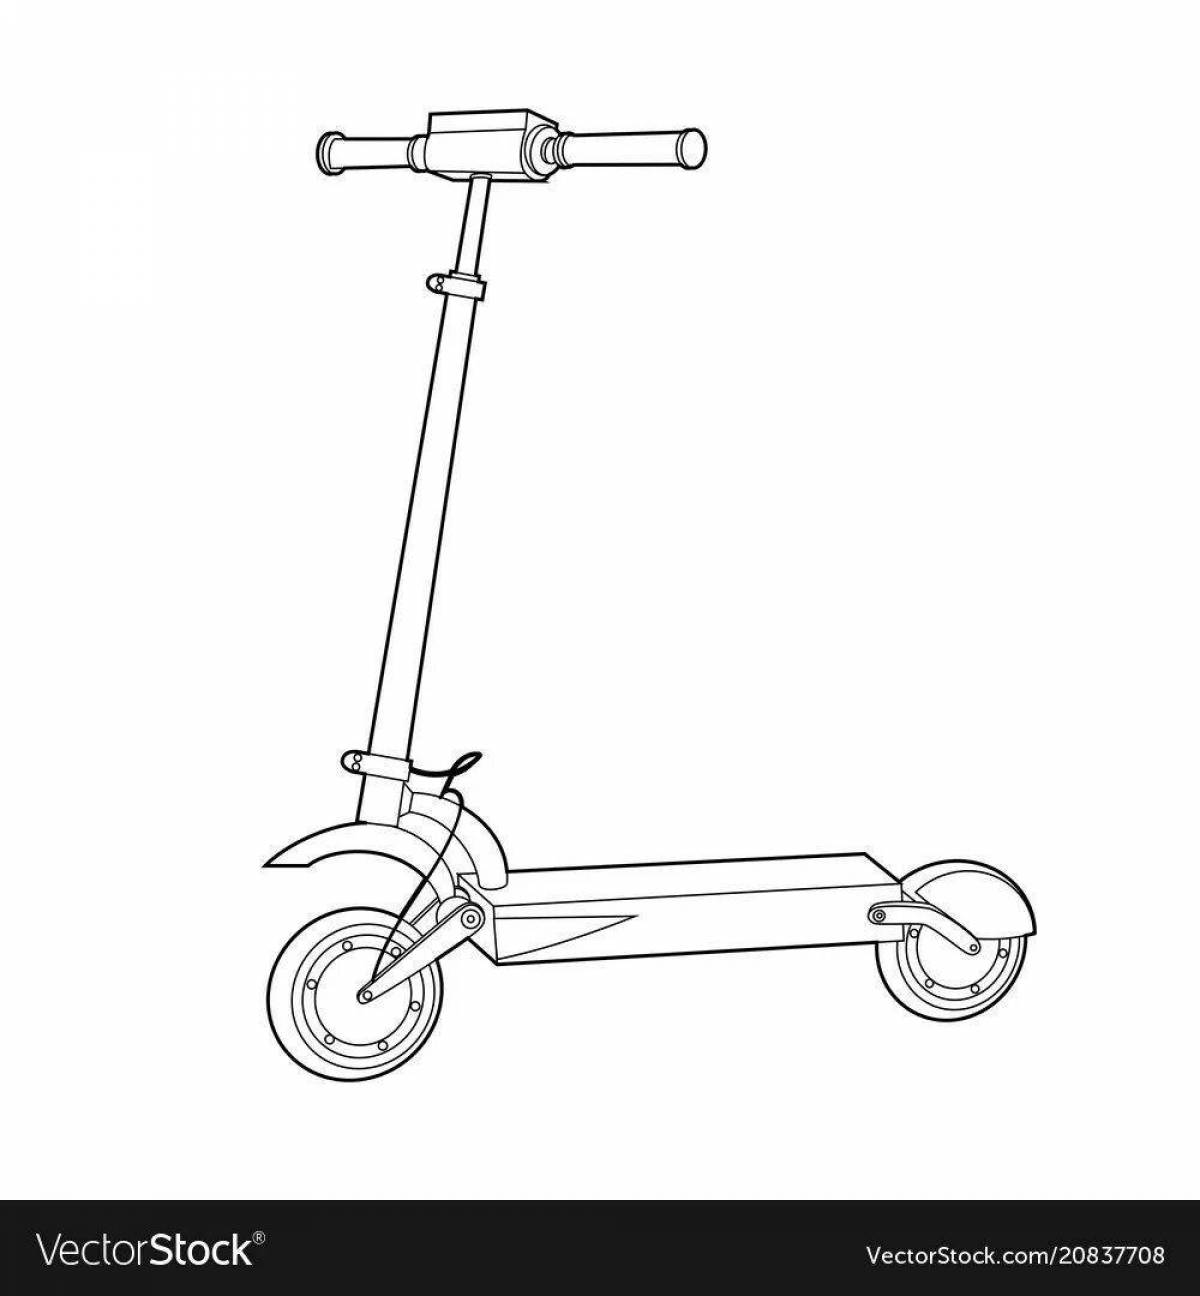 Outstanding scooter coloring book for kids